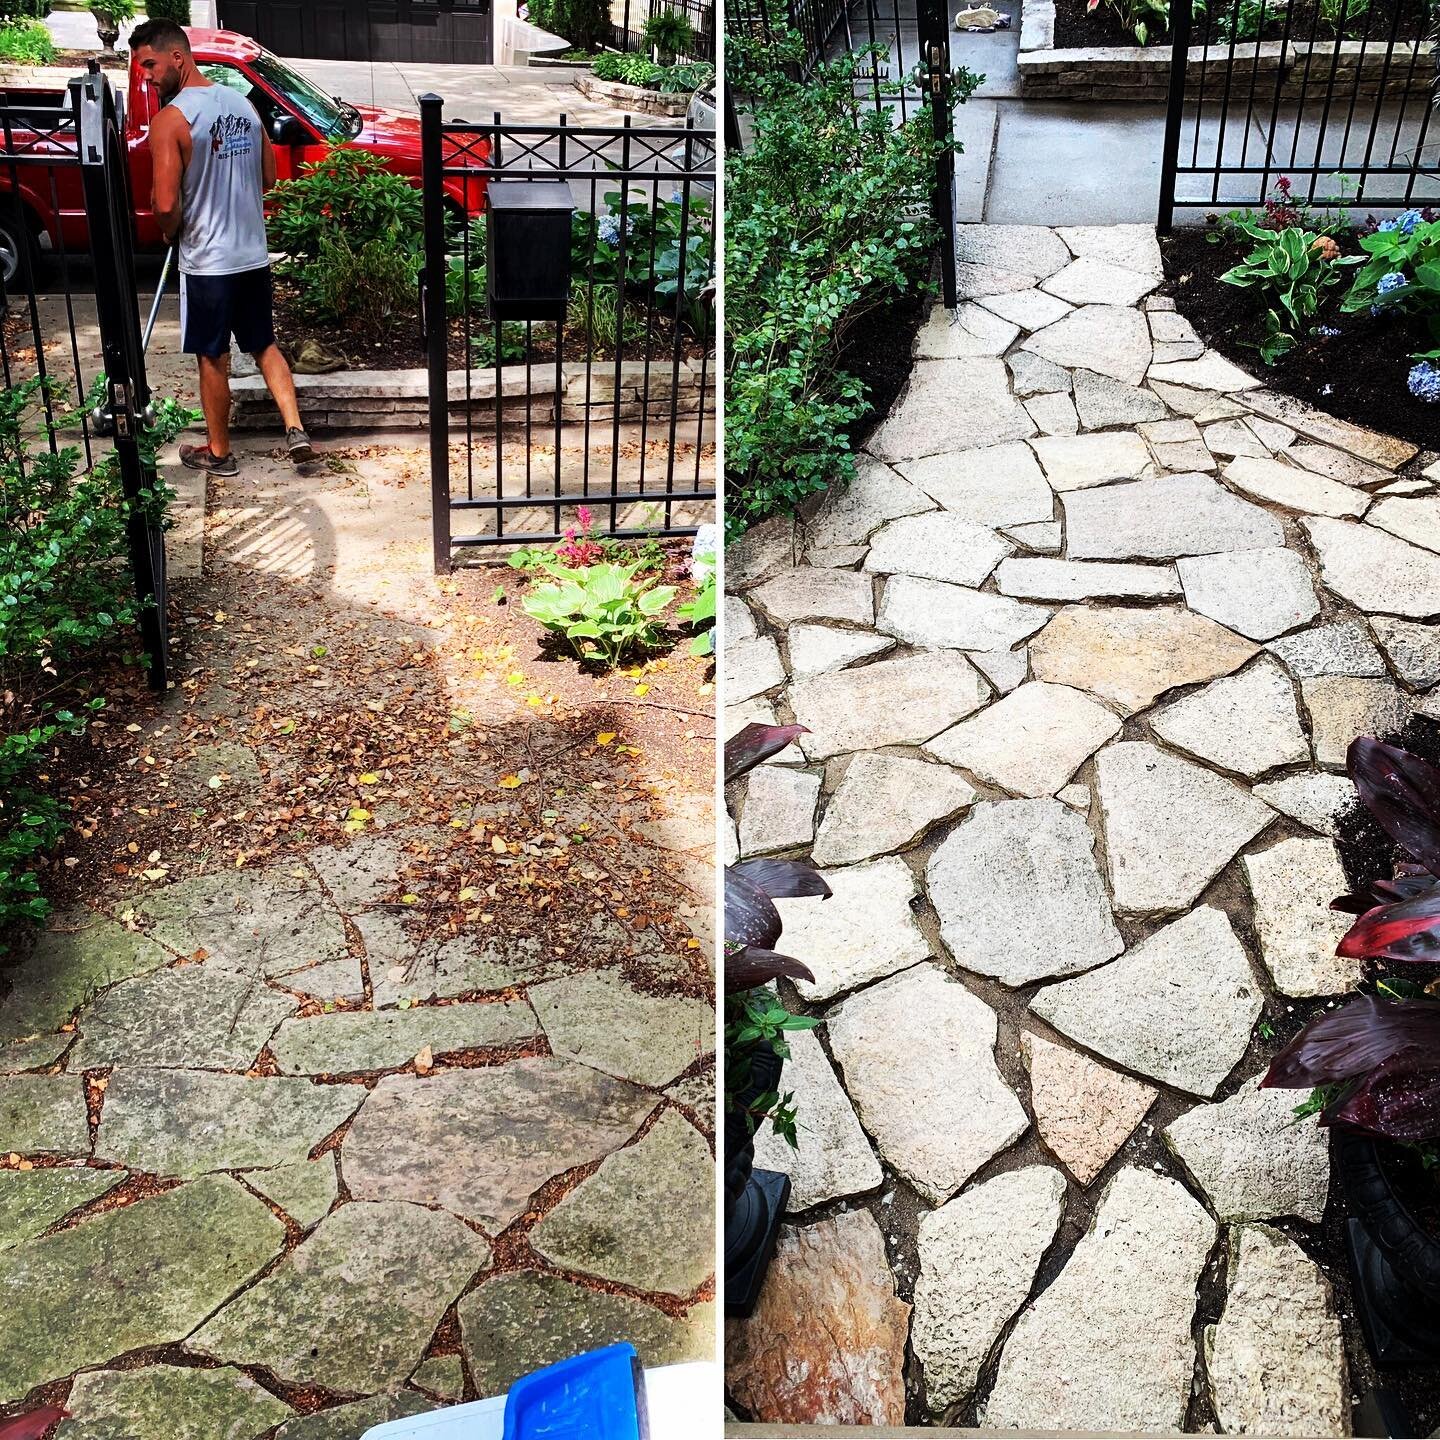 Before and after of a recent cleanup - we originally installed this more than 6 years ago! 🌷